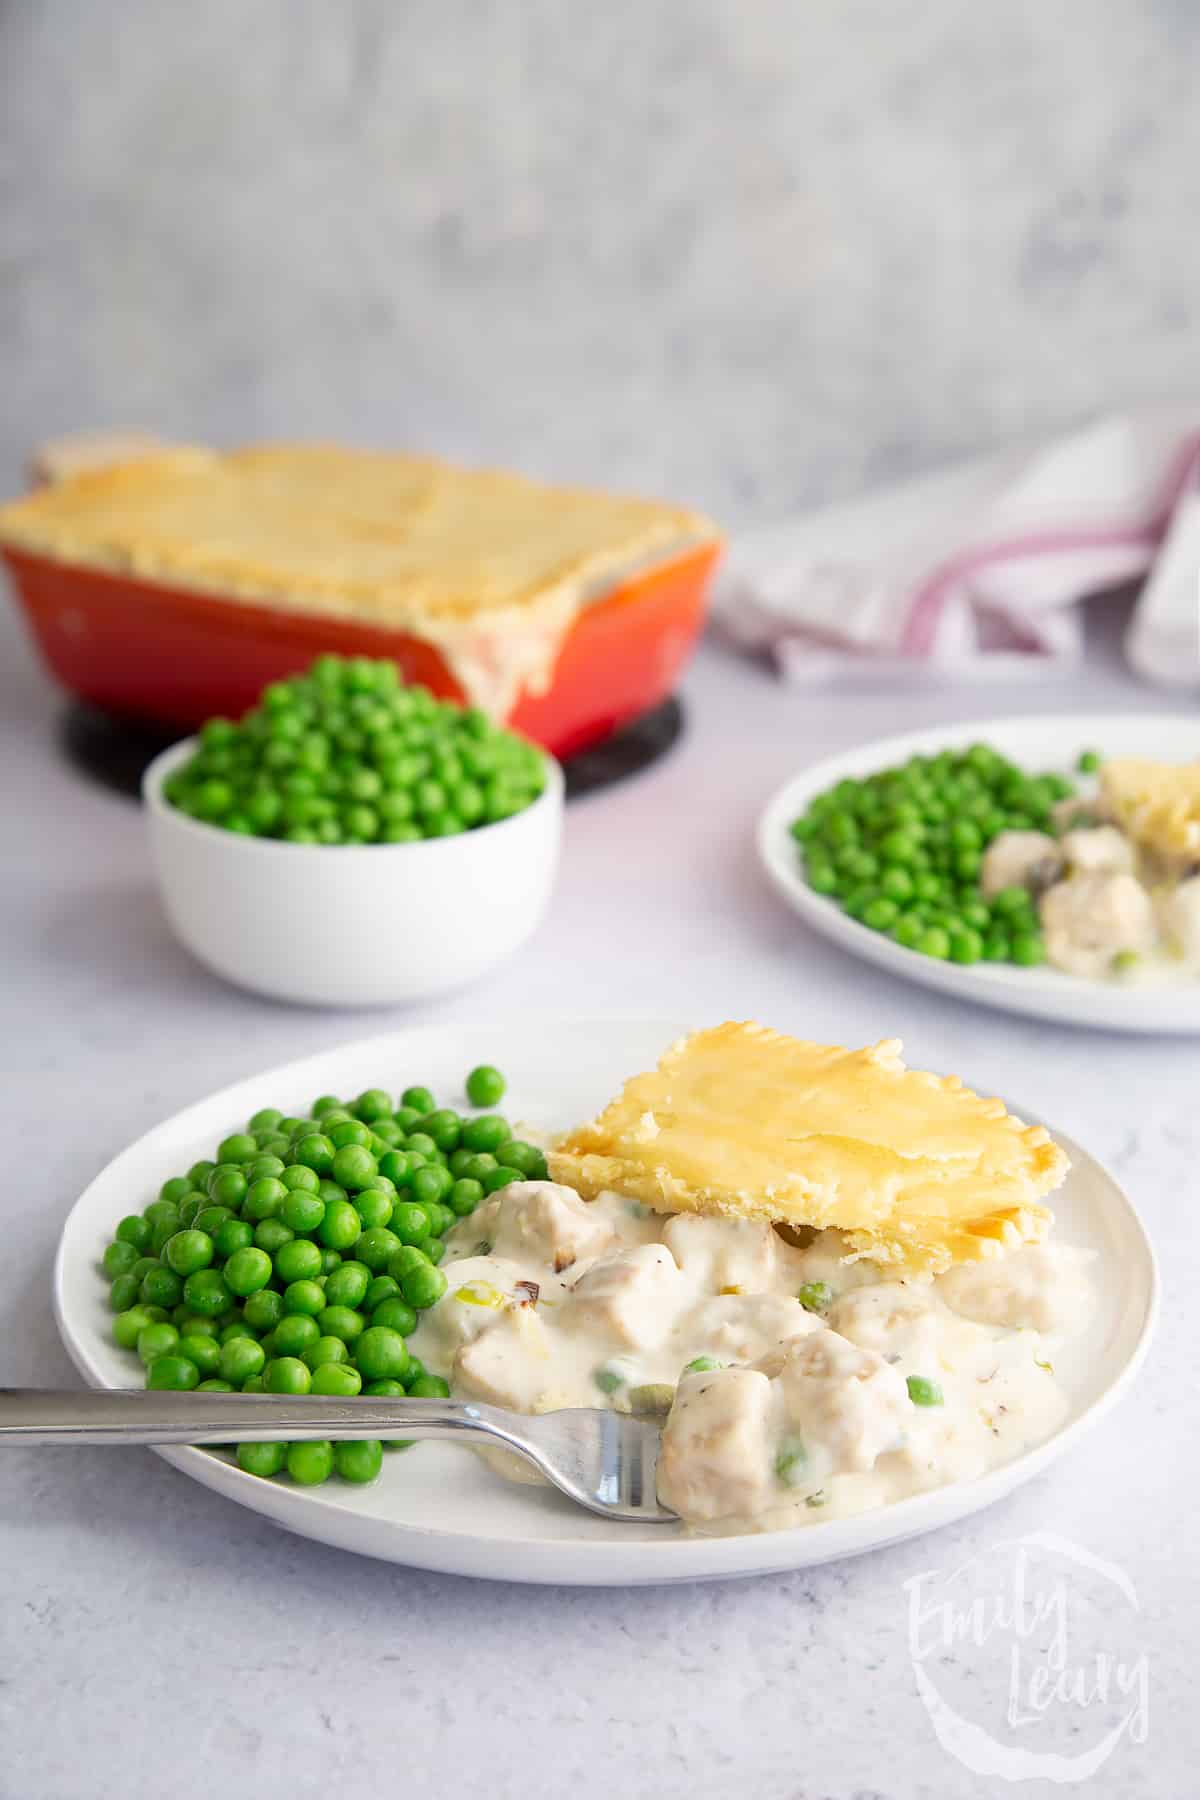 a piece of Gluten free vegetarian pie on a white plate with garden peas on the side and a fork at the front.